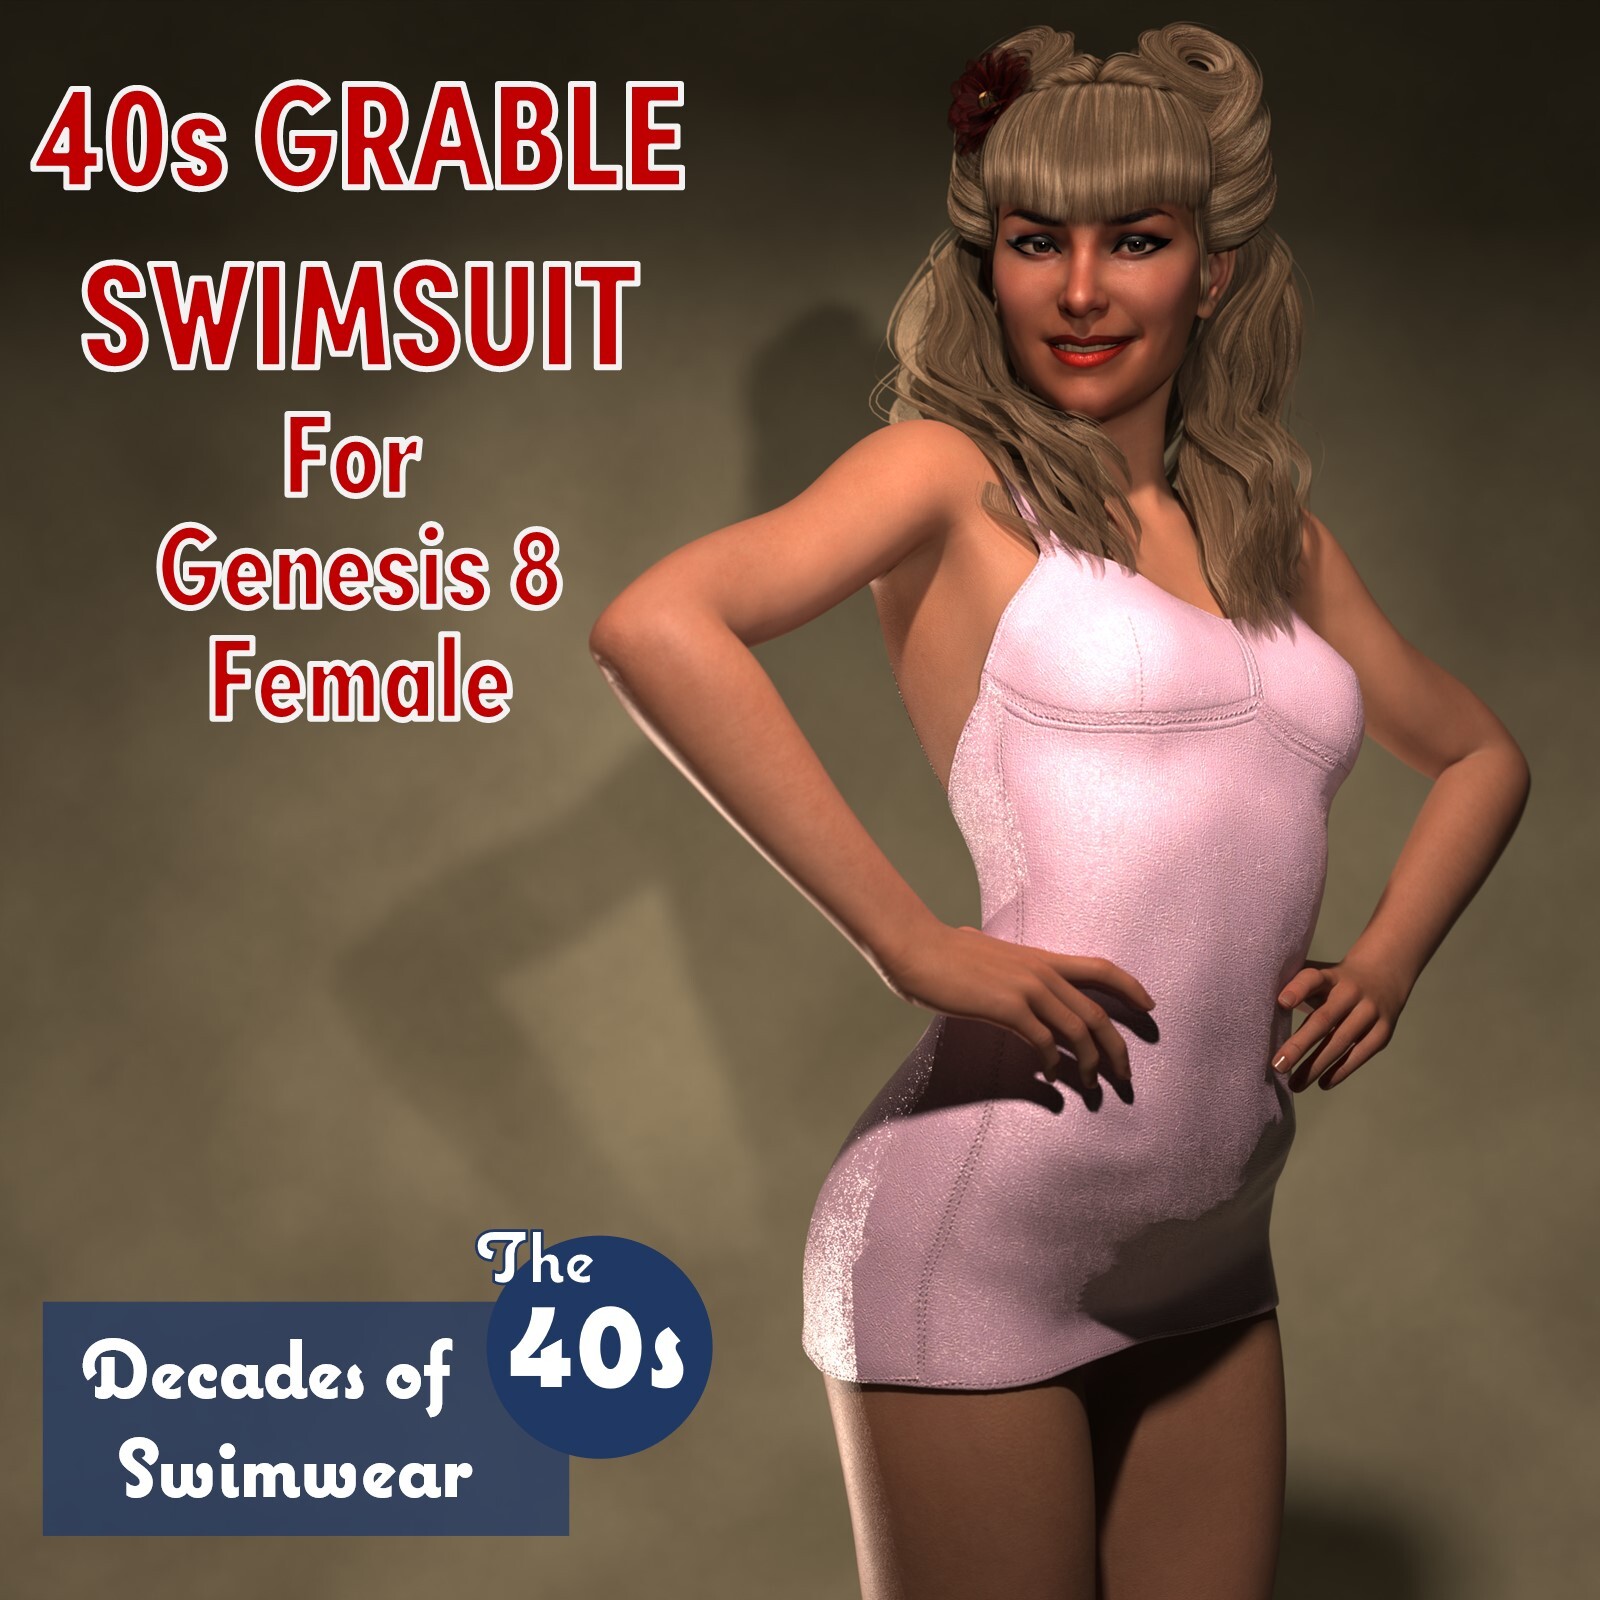 40s Grable Swimsuit - Decades of Swimwear, The 40s by: Chris Cox, 3D Models by Daz 3D